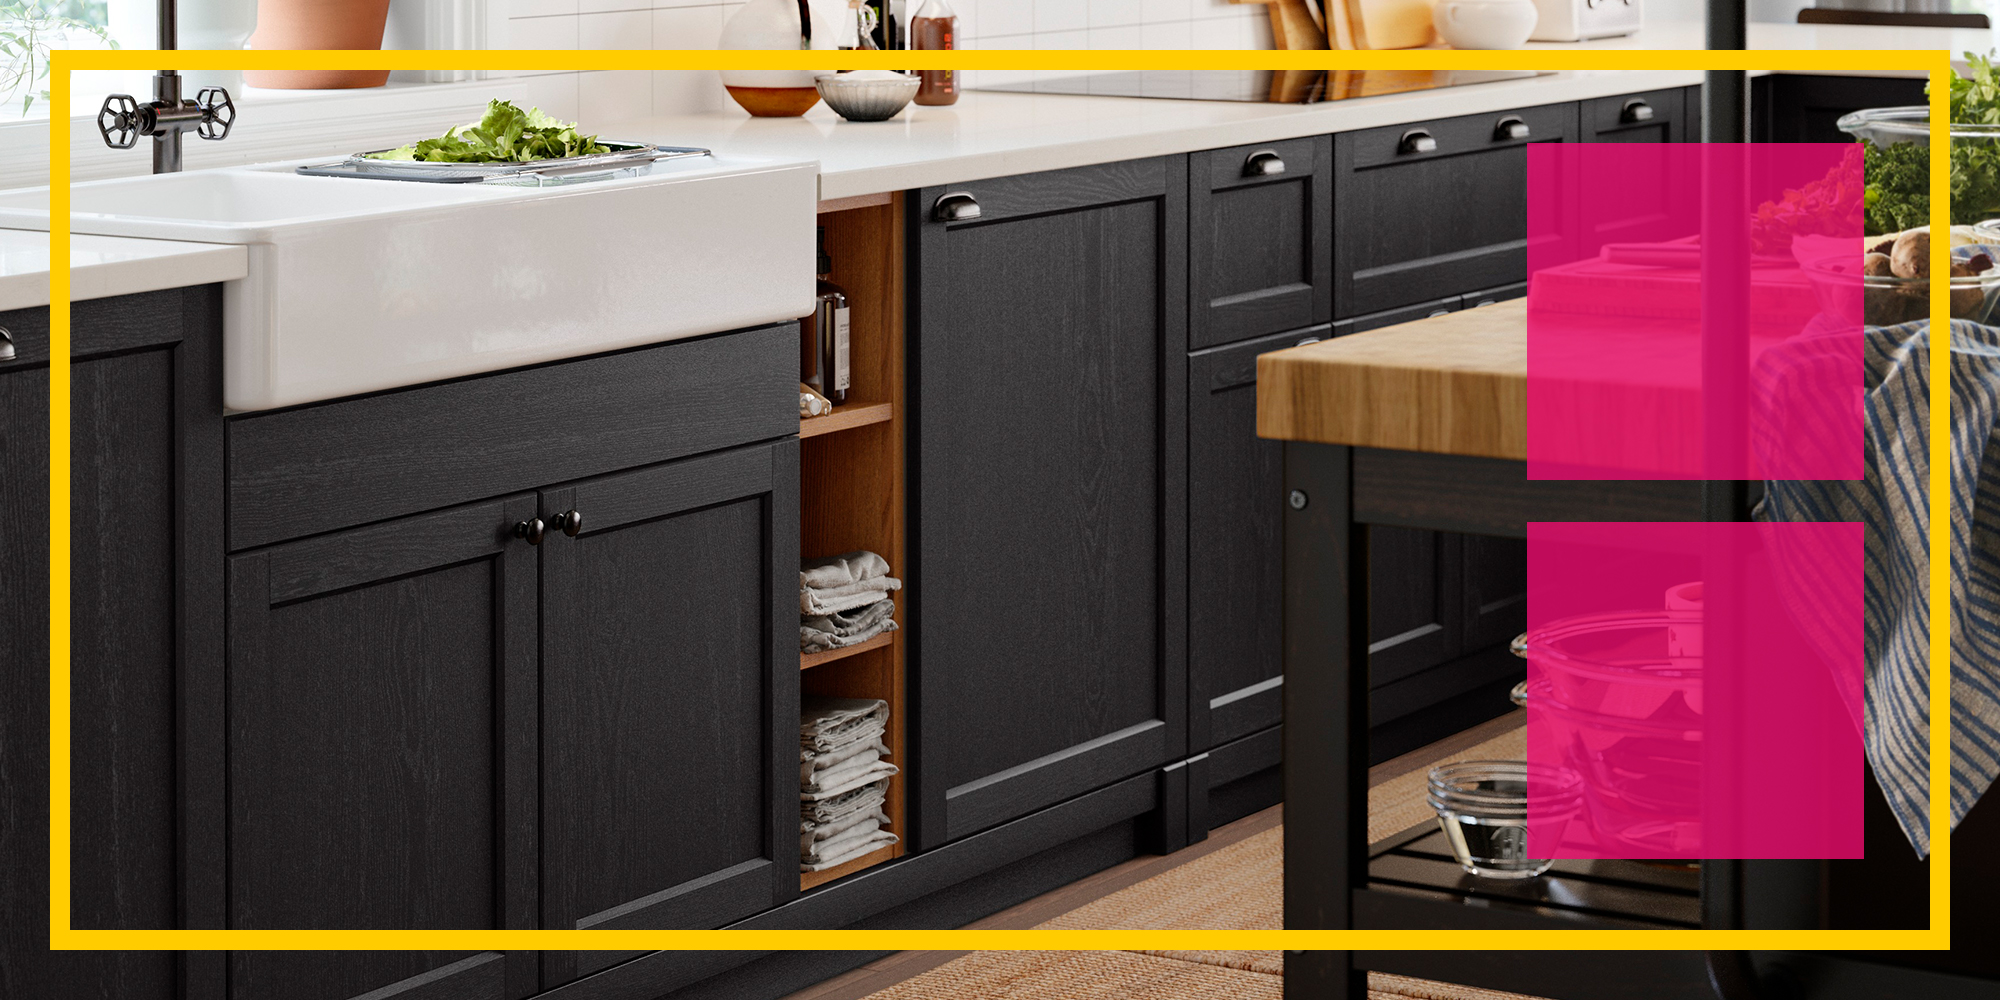 ikea kitchen inspiration: doors and drawers